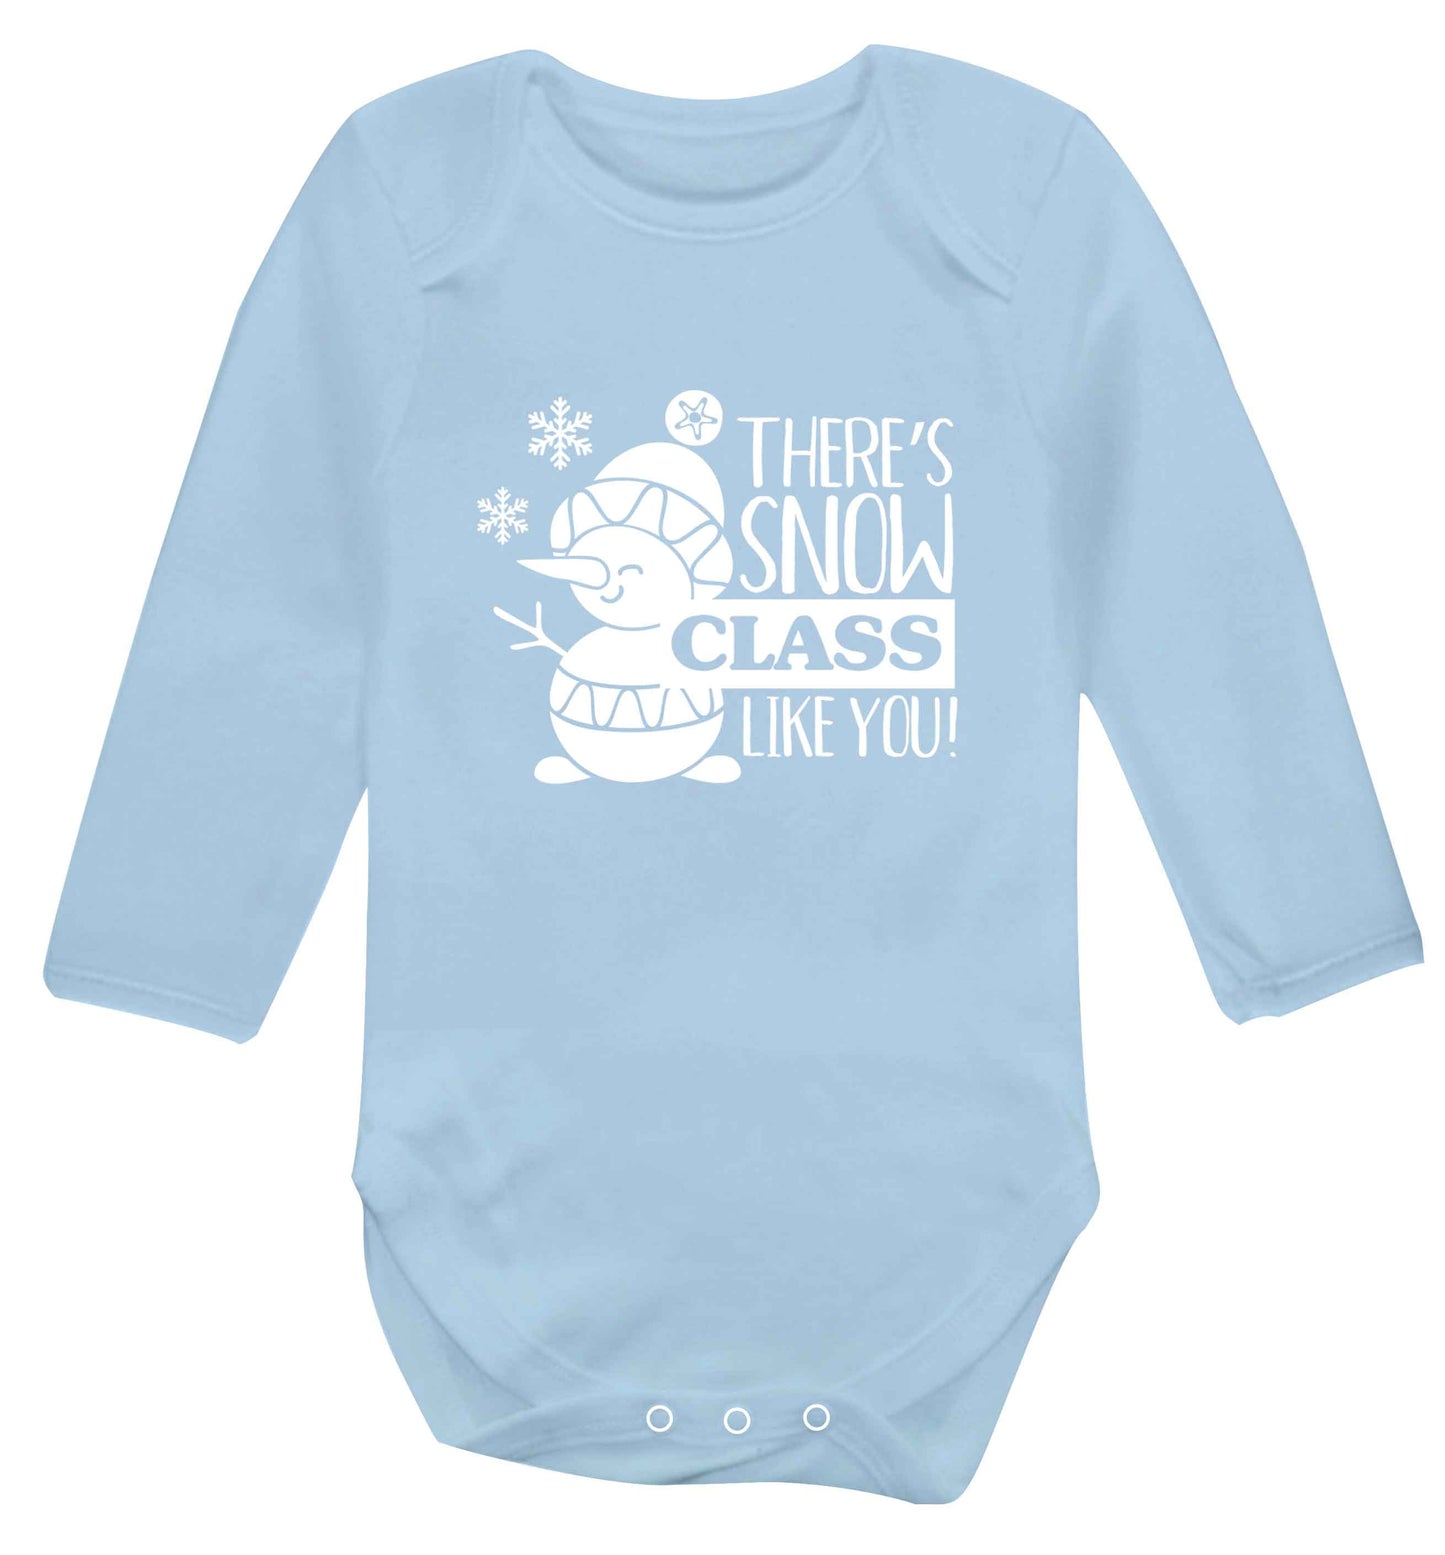 There's snow class like you baby vest long sleeved pale blue 6-12 months